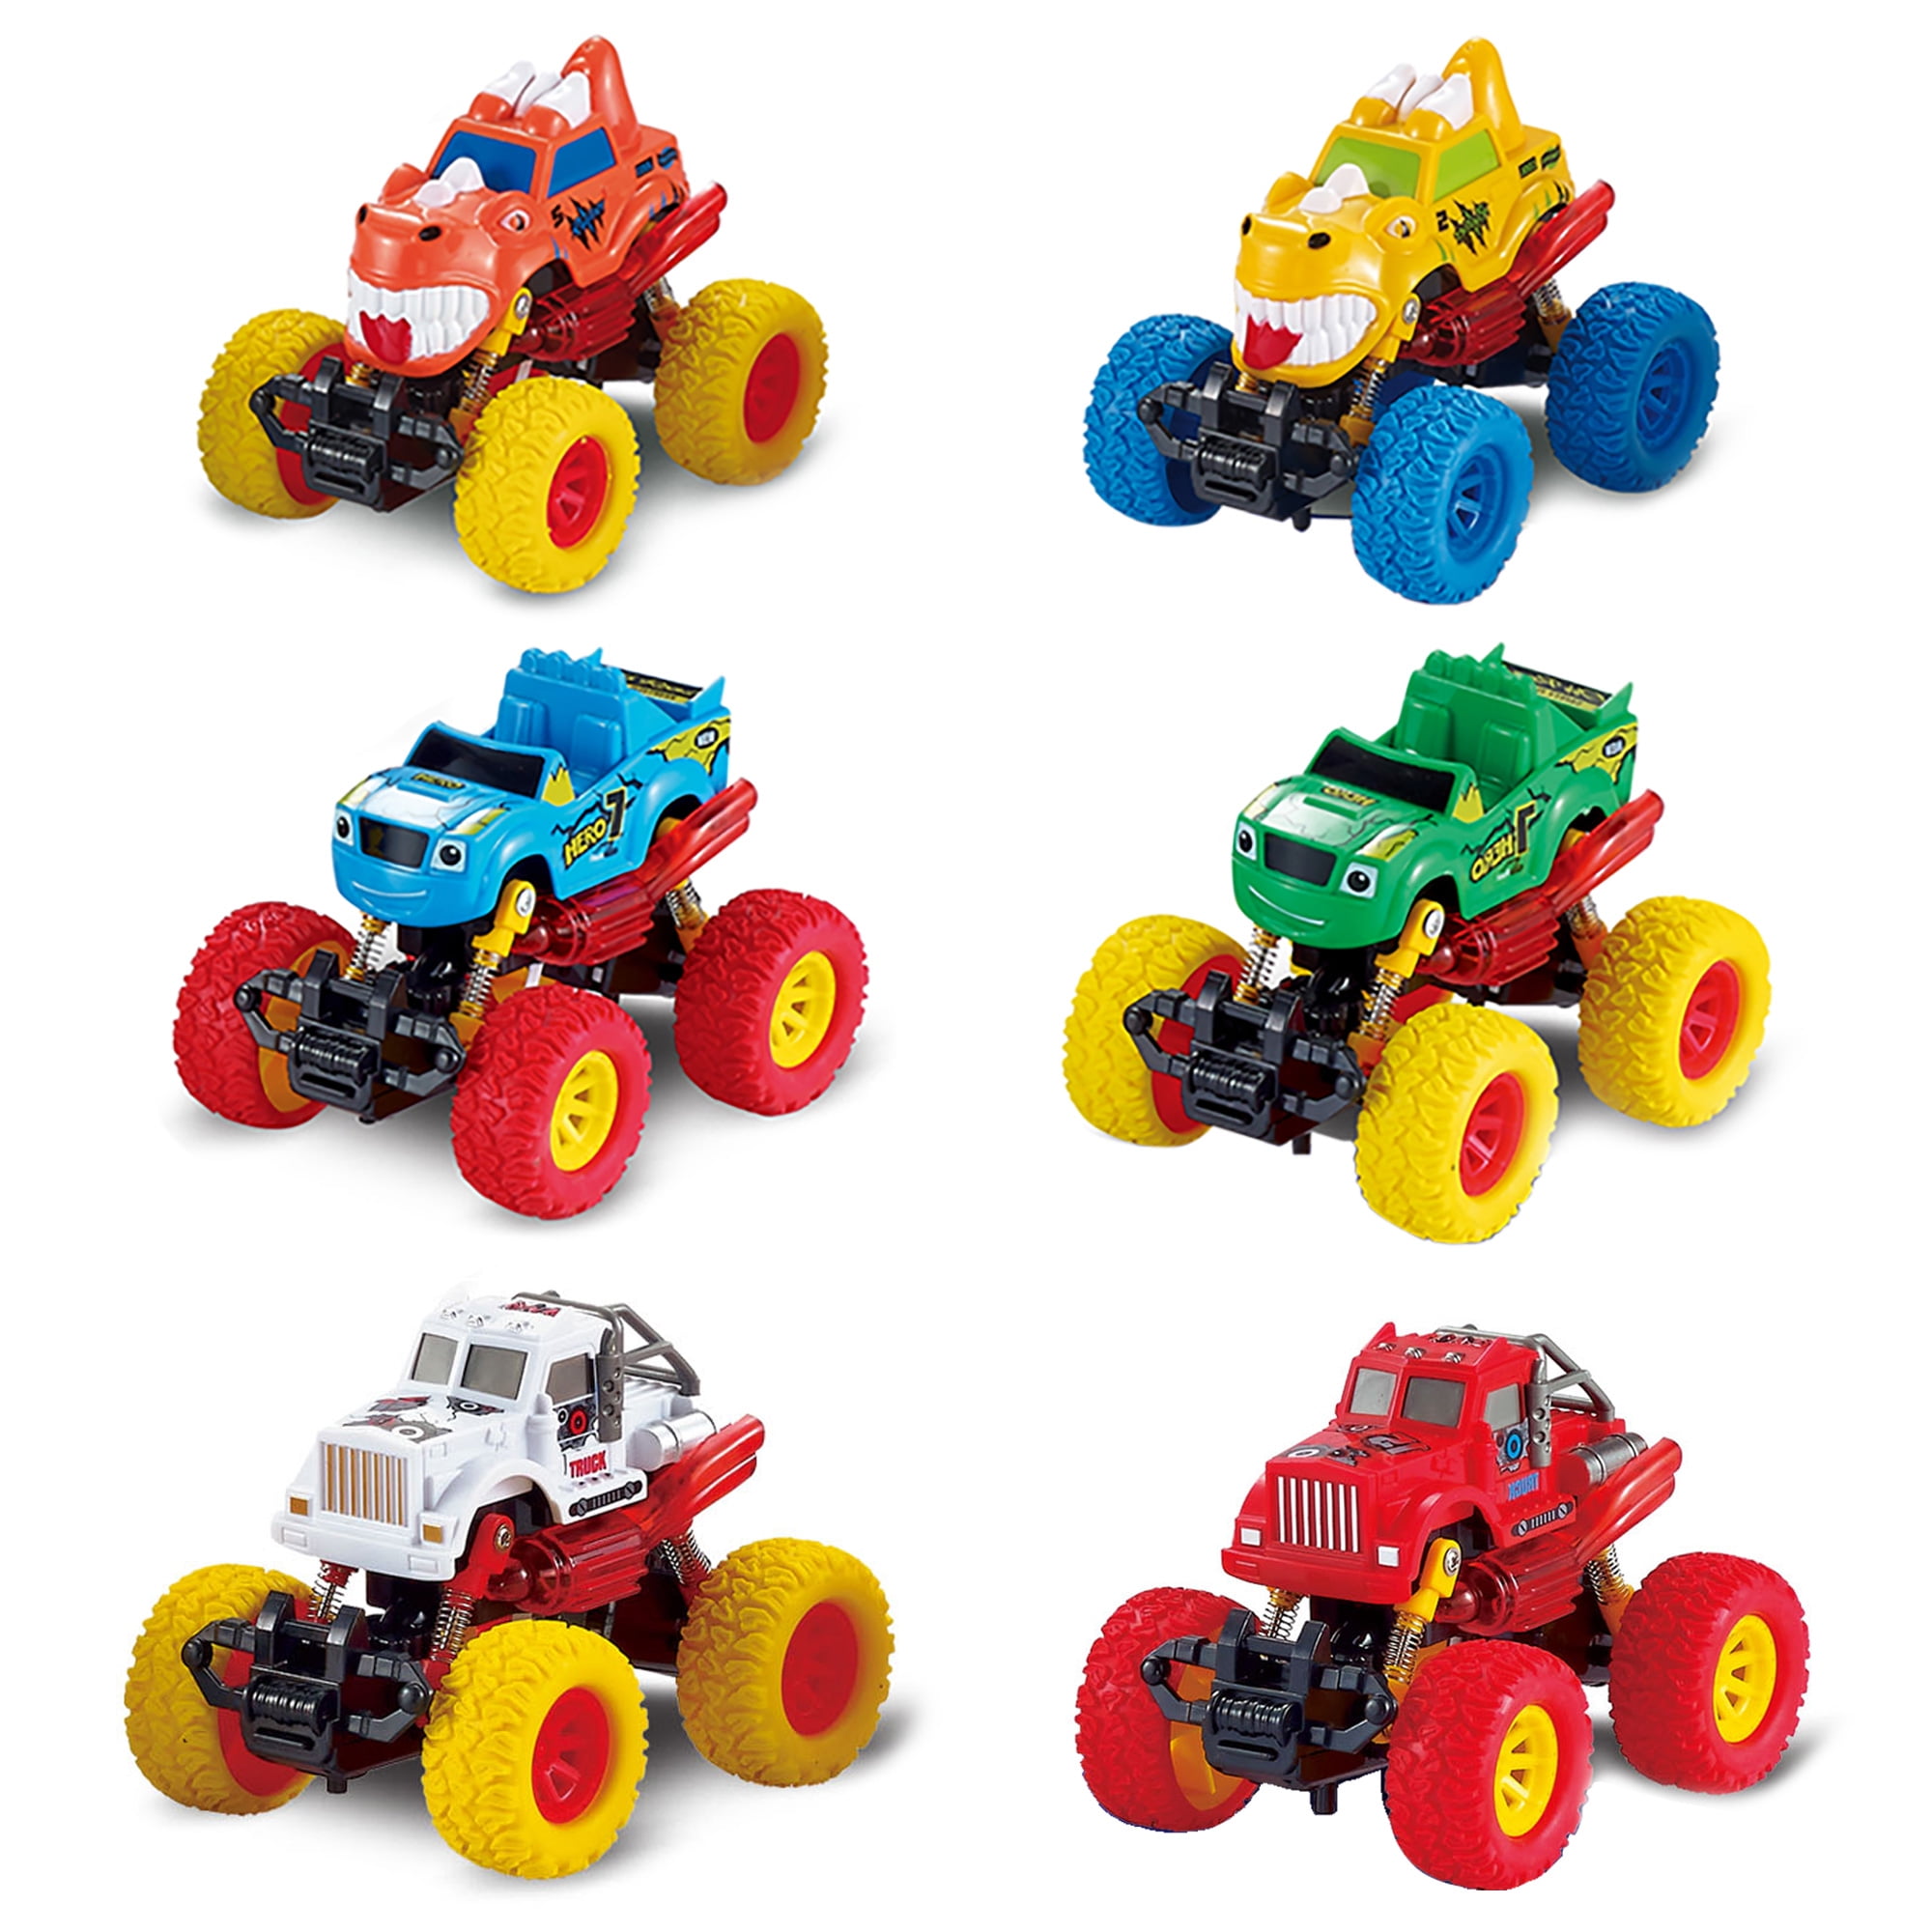 Albums 101+ Wallpaper Auto World Toy Cars Sharp